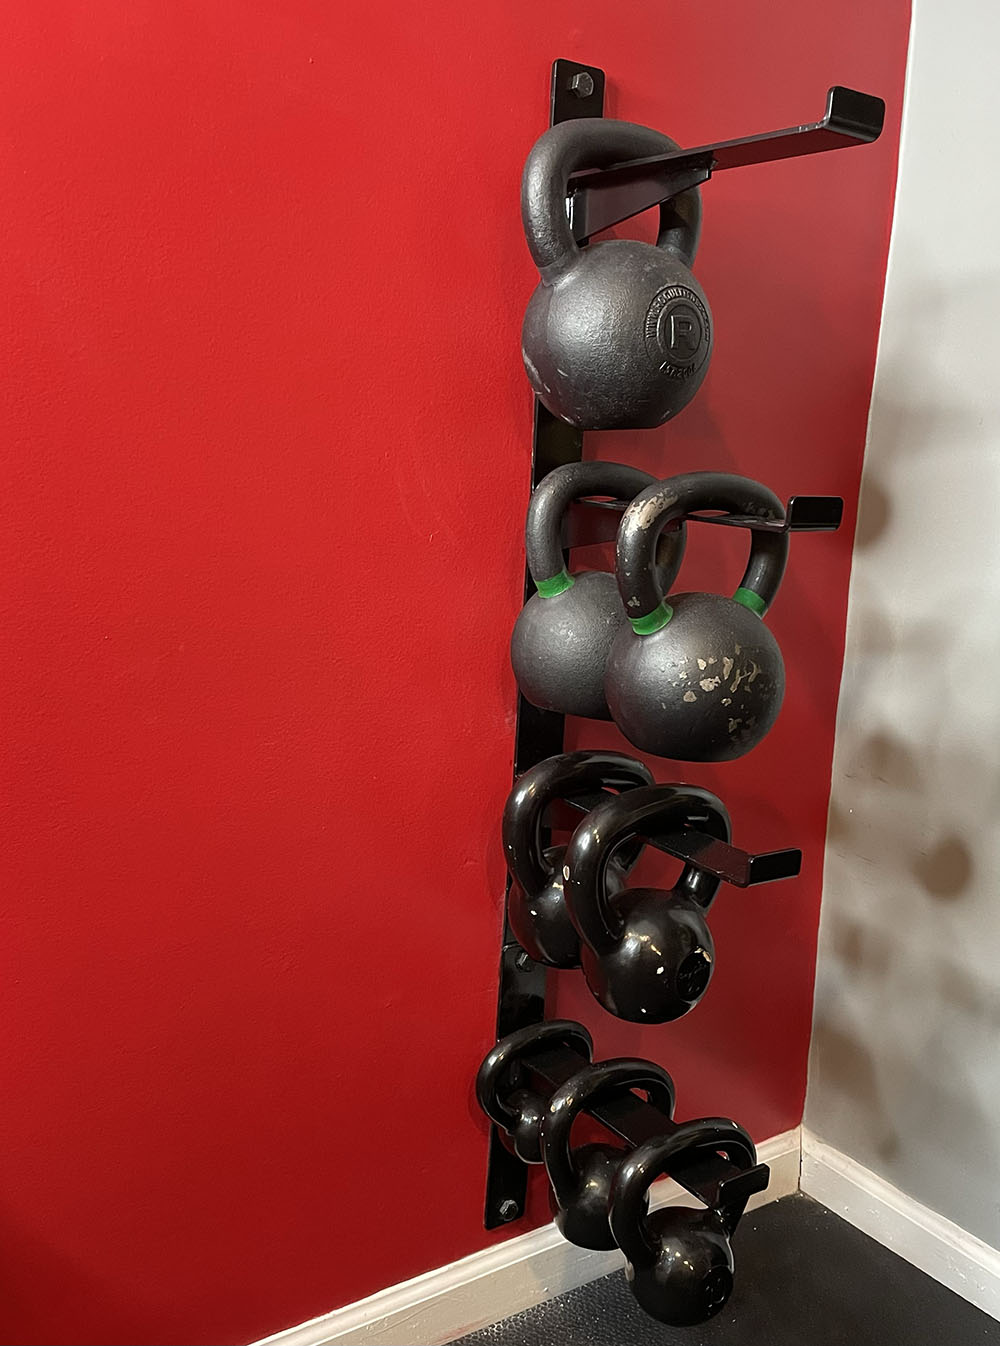 The Wall Mounted Kettlebell Storage Rack was created to provide storage solutions for your kettlebells and get your weights off the ground. This image presents the Wall Mounted Kettlebell Storage Rack in use with several kettlebells hanging from the rack.